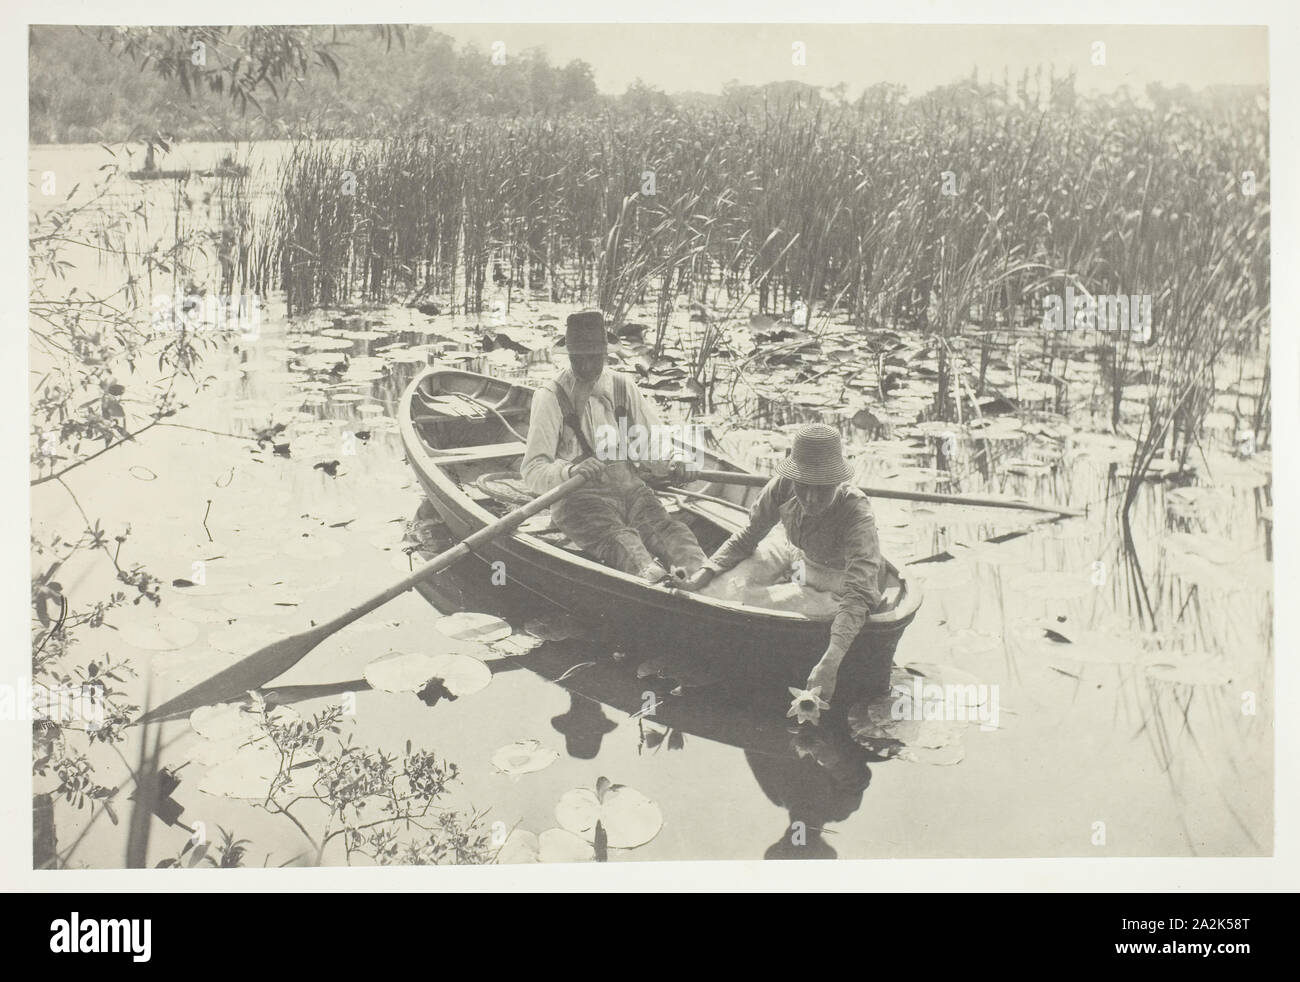 Gathering Water-Lilies, 1886, printed 1886, Peter Henry Emerson, English, born Cuba, 1856–1936, England, Platinum print, pl. IX from the album 'Life and Landscape on the Norfolk Broads' (1886), edition of 200, 19.7 × 29.1 cm (image/paper), 28.6 × 41 cm (album page Stock Photo